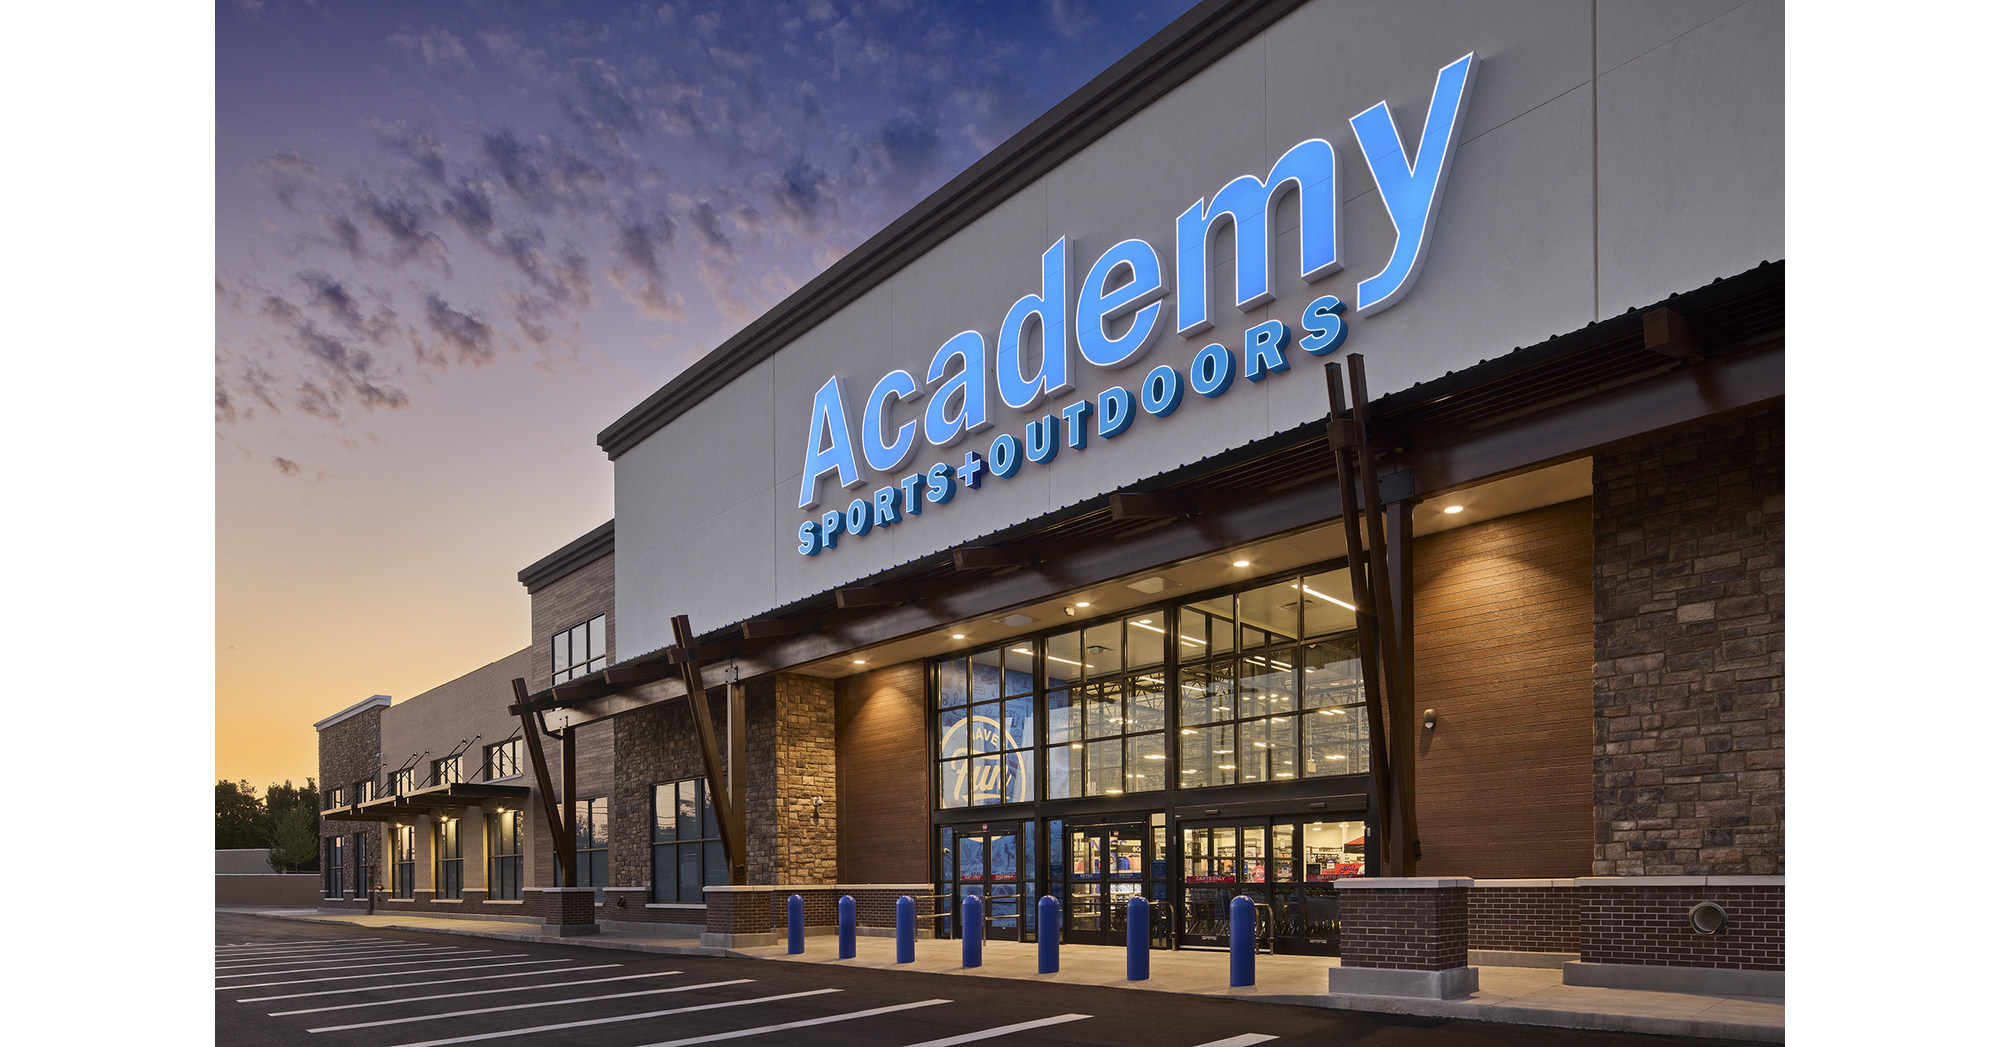 Academy Sports + Outdoors Continues Growth with Two New Stores:  Barboursville, W.Va. and Pinellas Park, Fla.